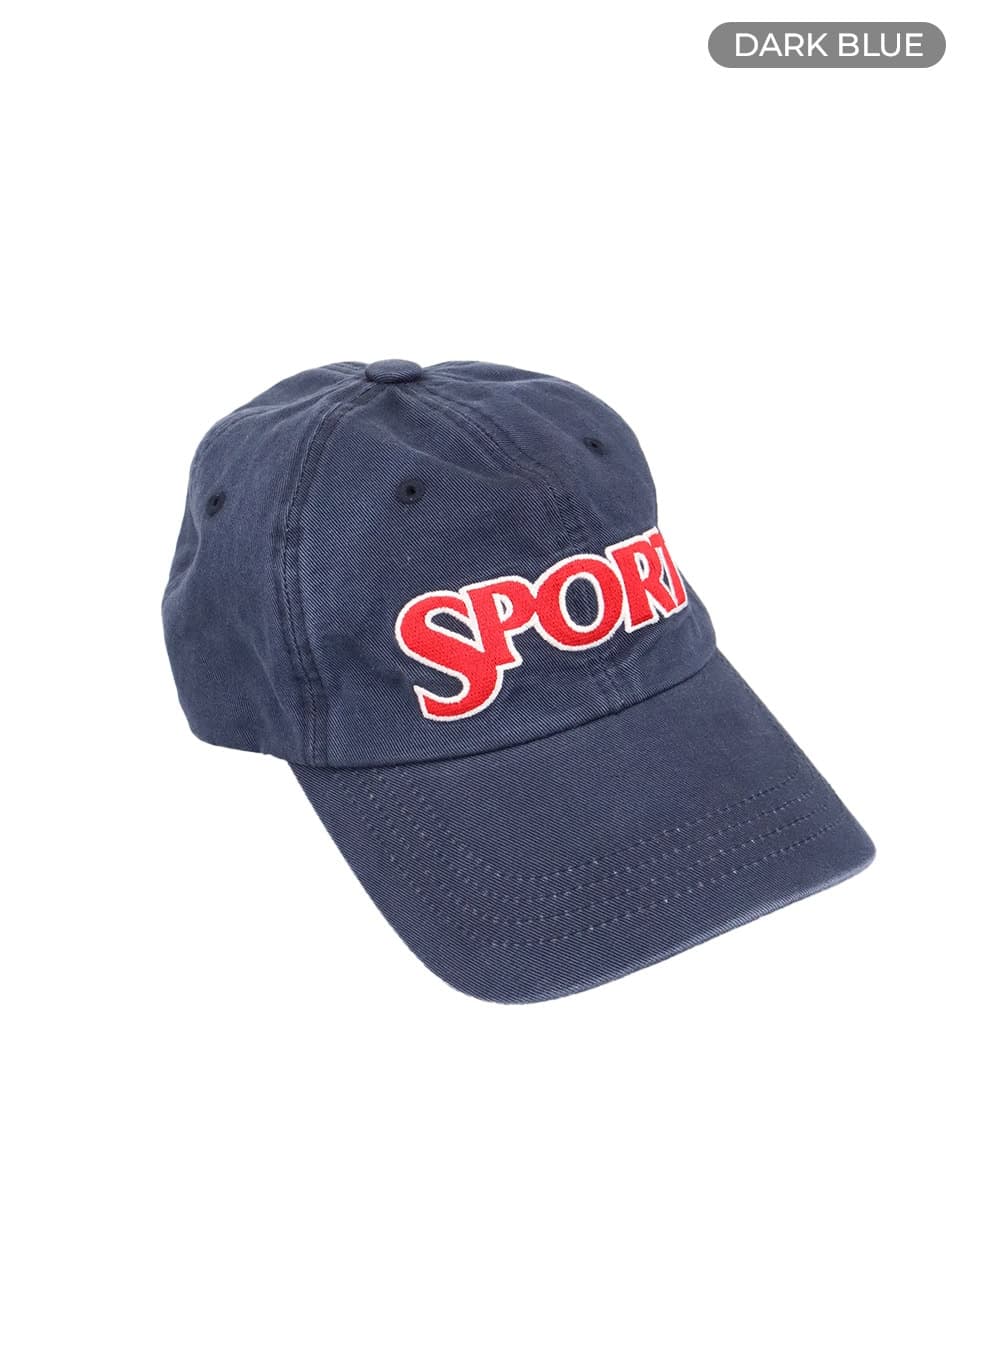 mens-washed-embroidered-cap-iy410